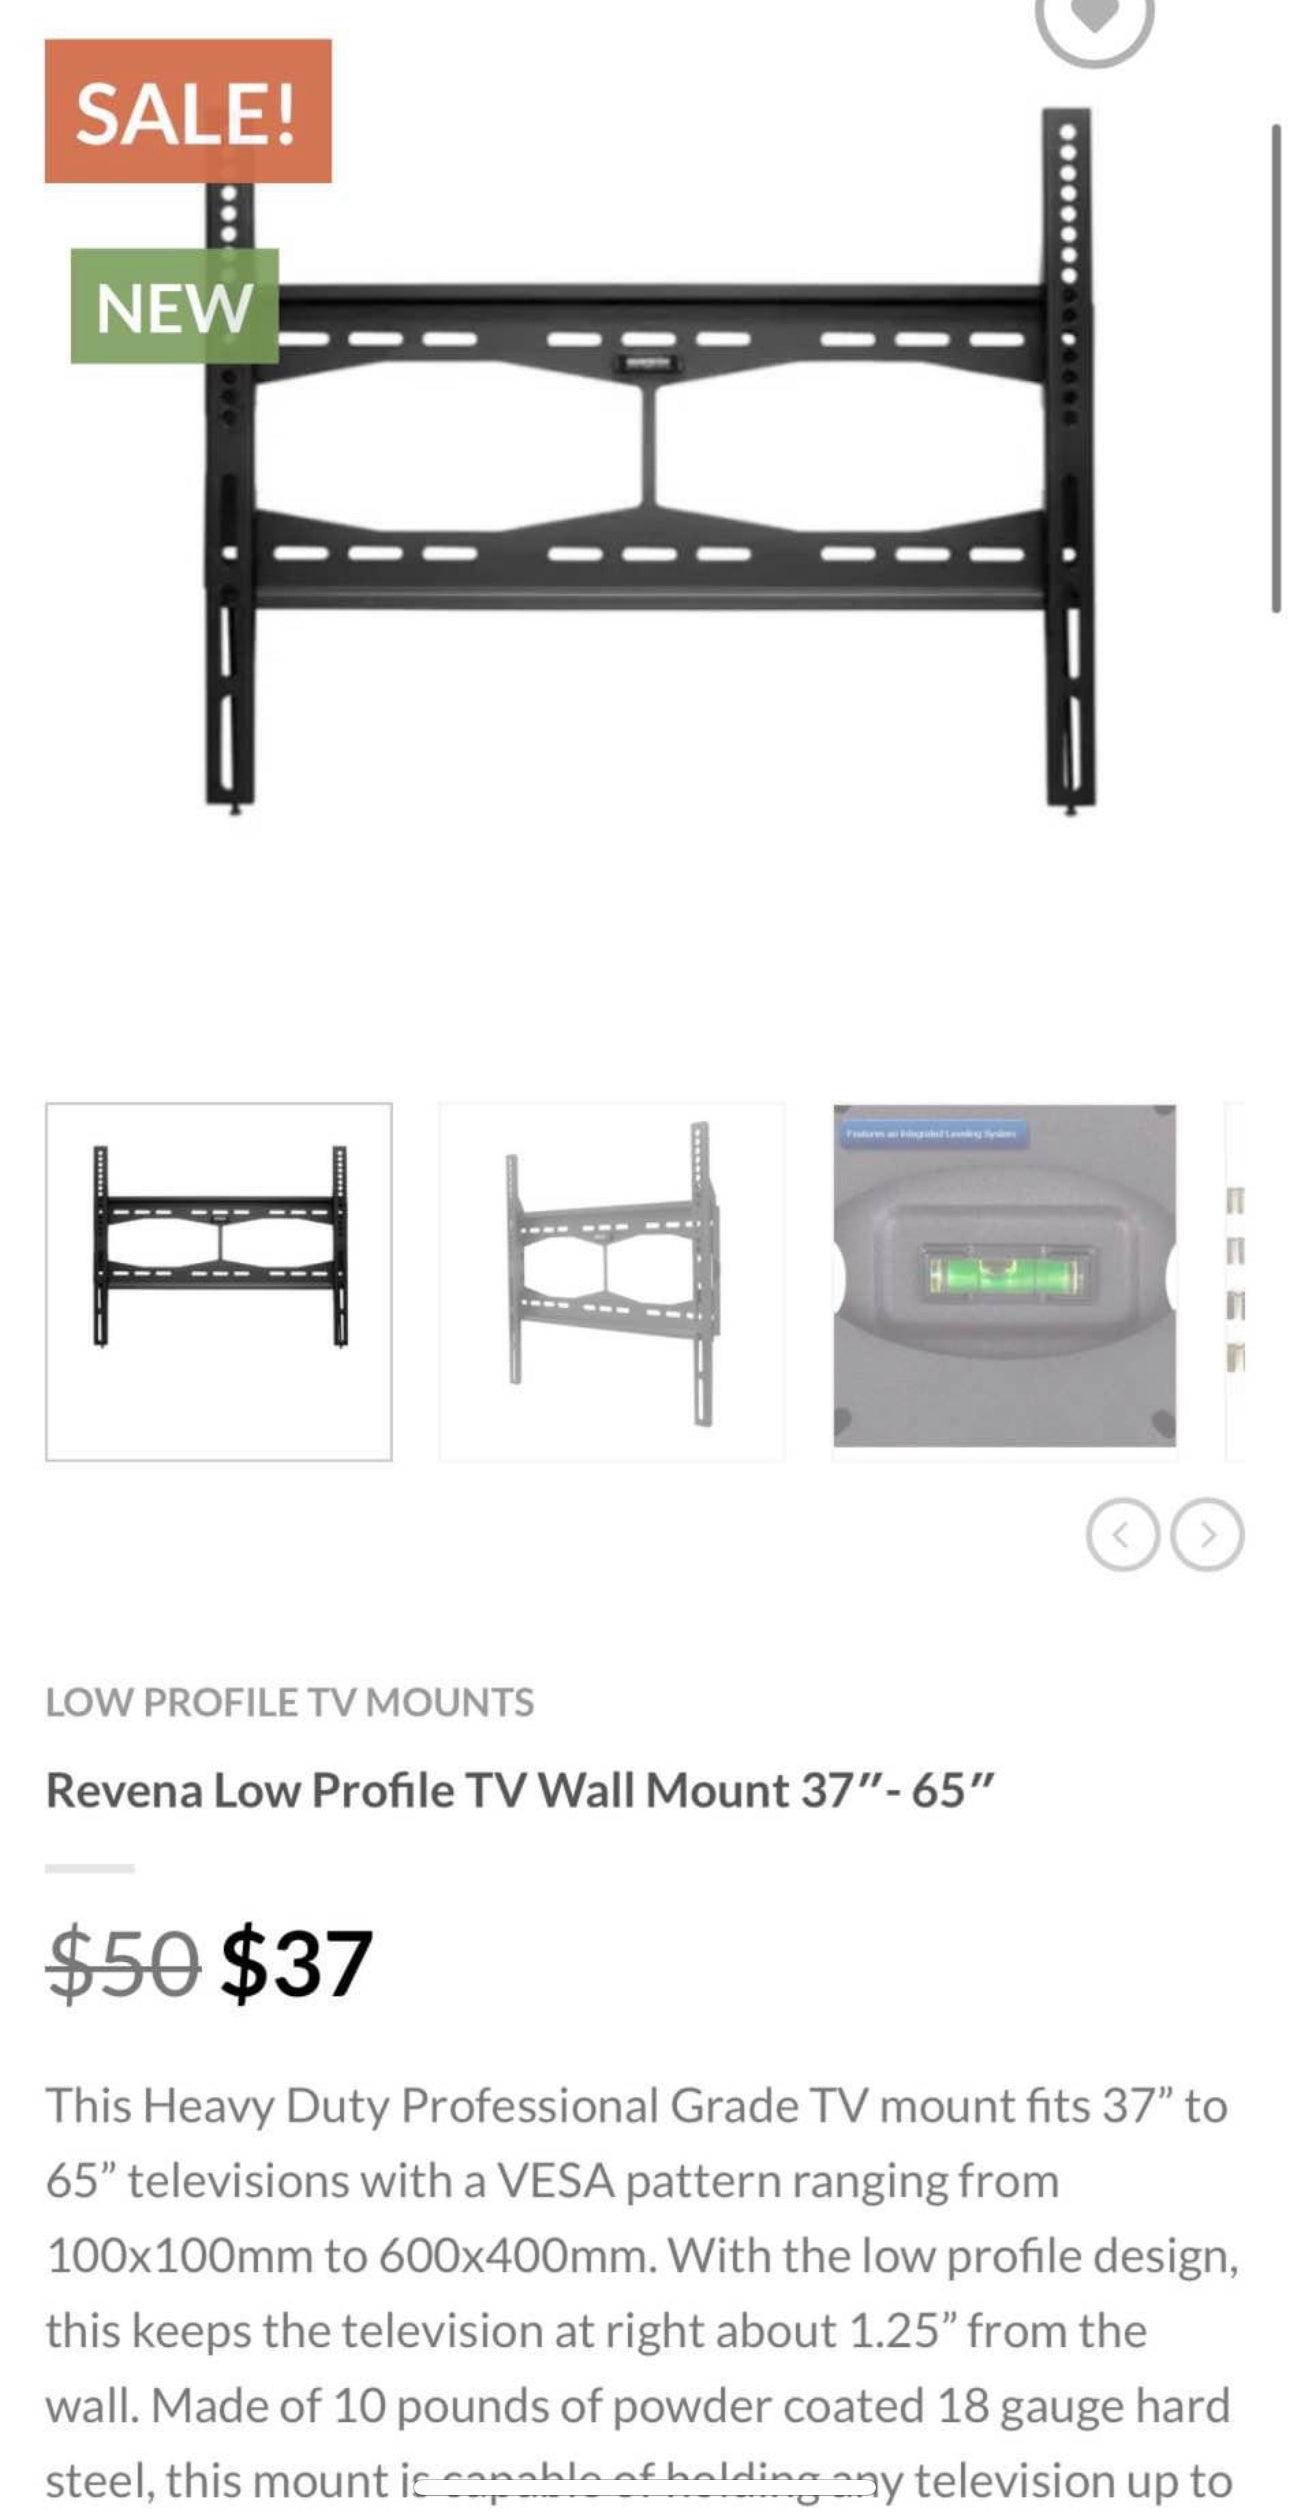 Brand New Revéna Flat Wall Mount for 37"-65" TVs - Mount Your TV with Ease!